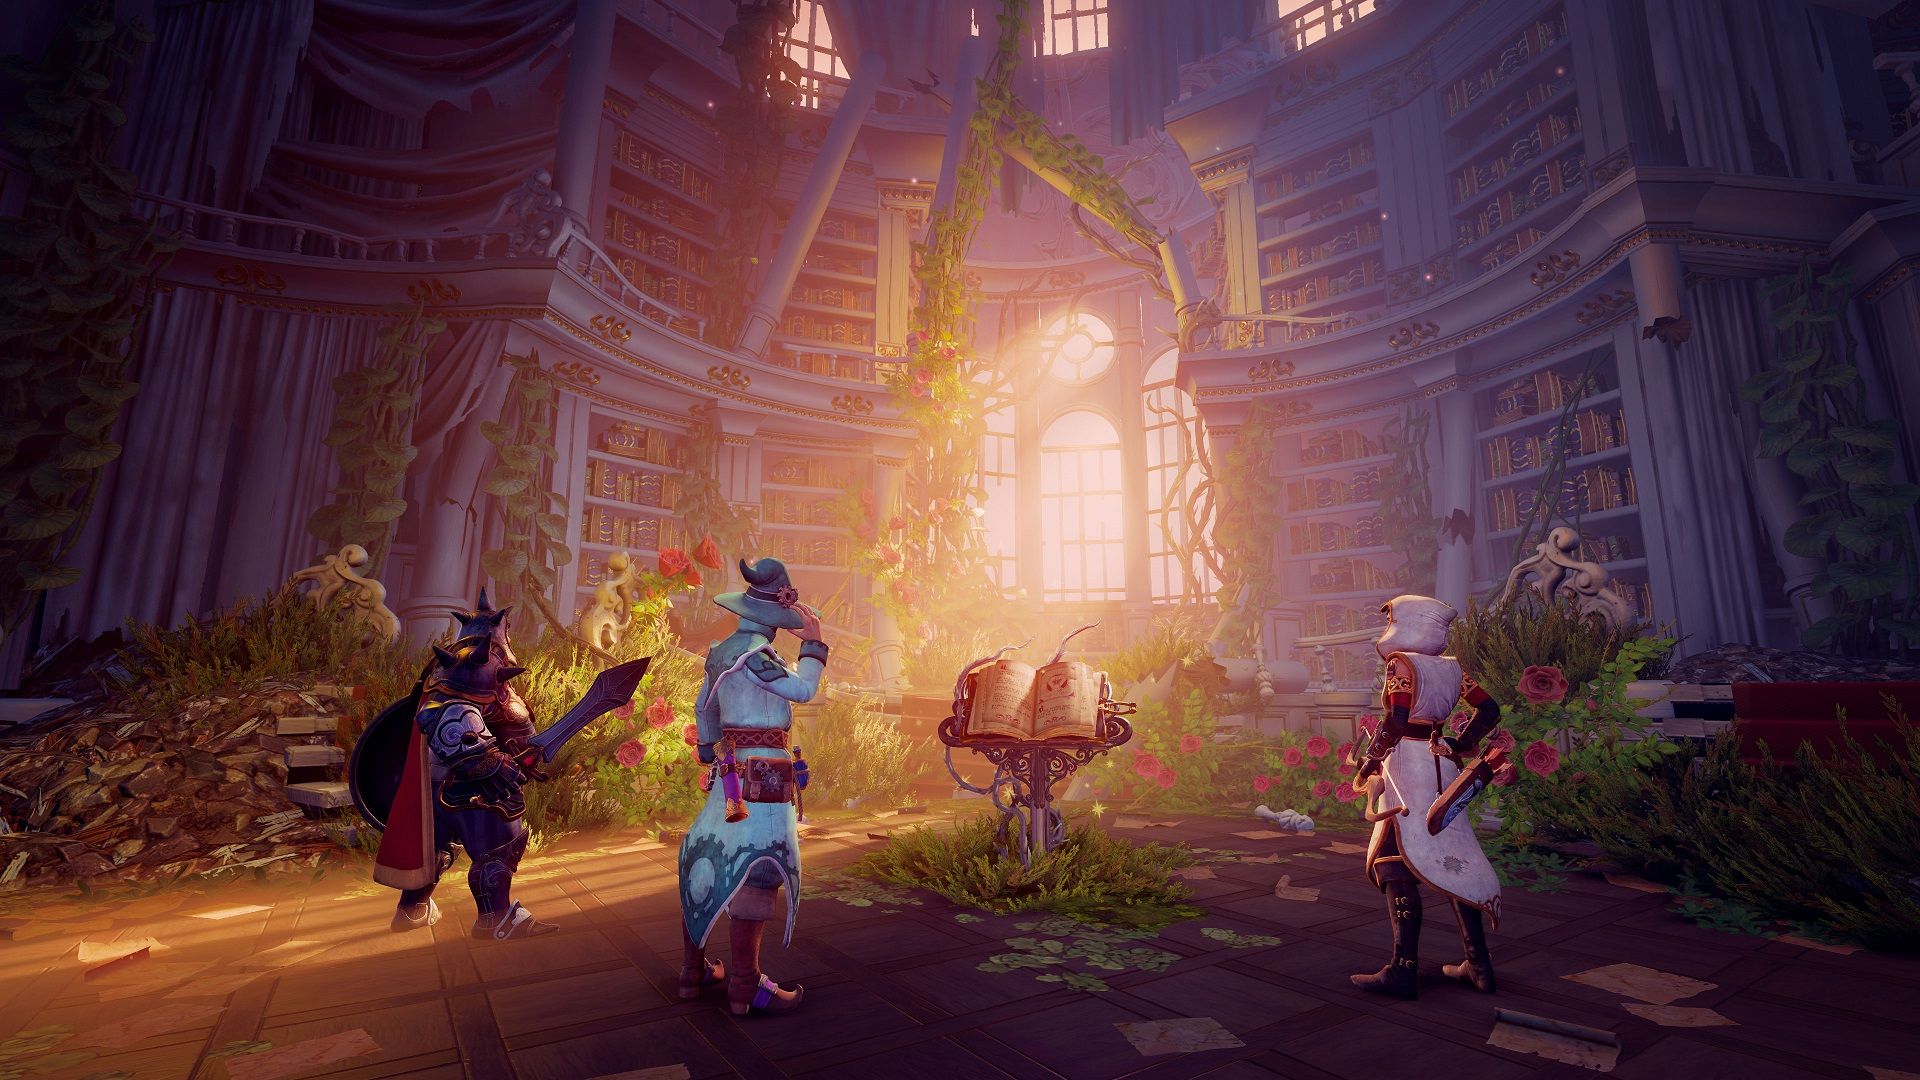 Trine 4 to release later this year